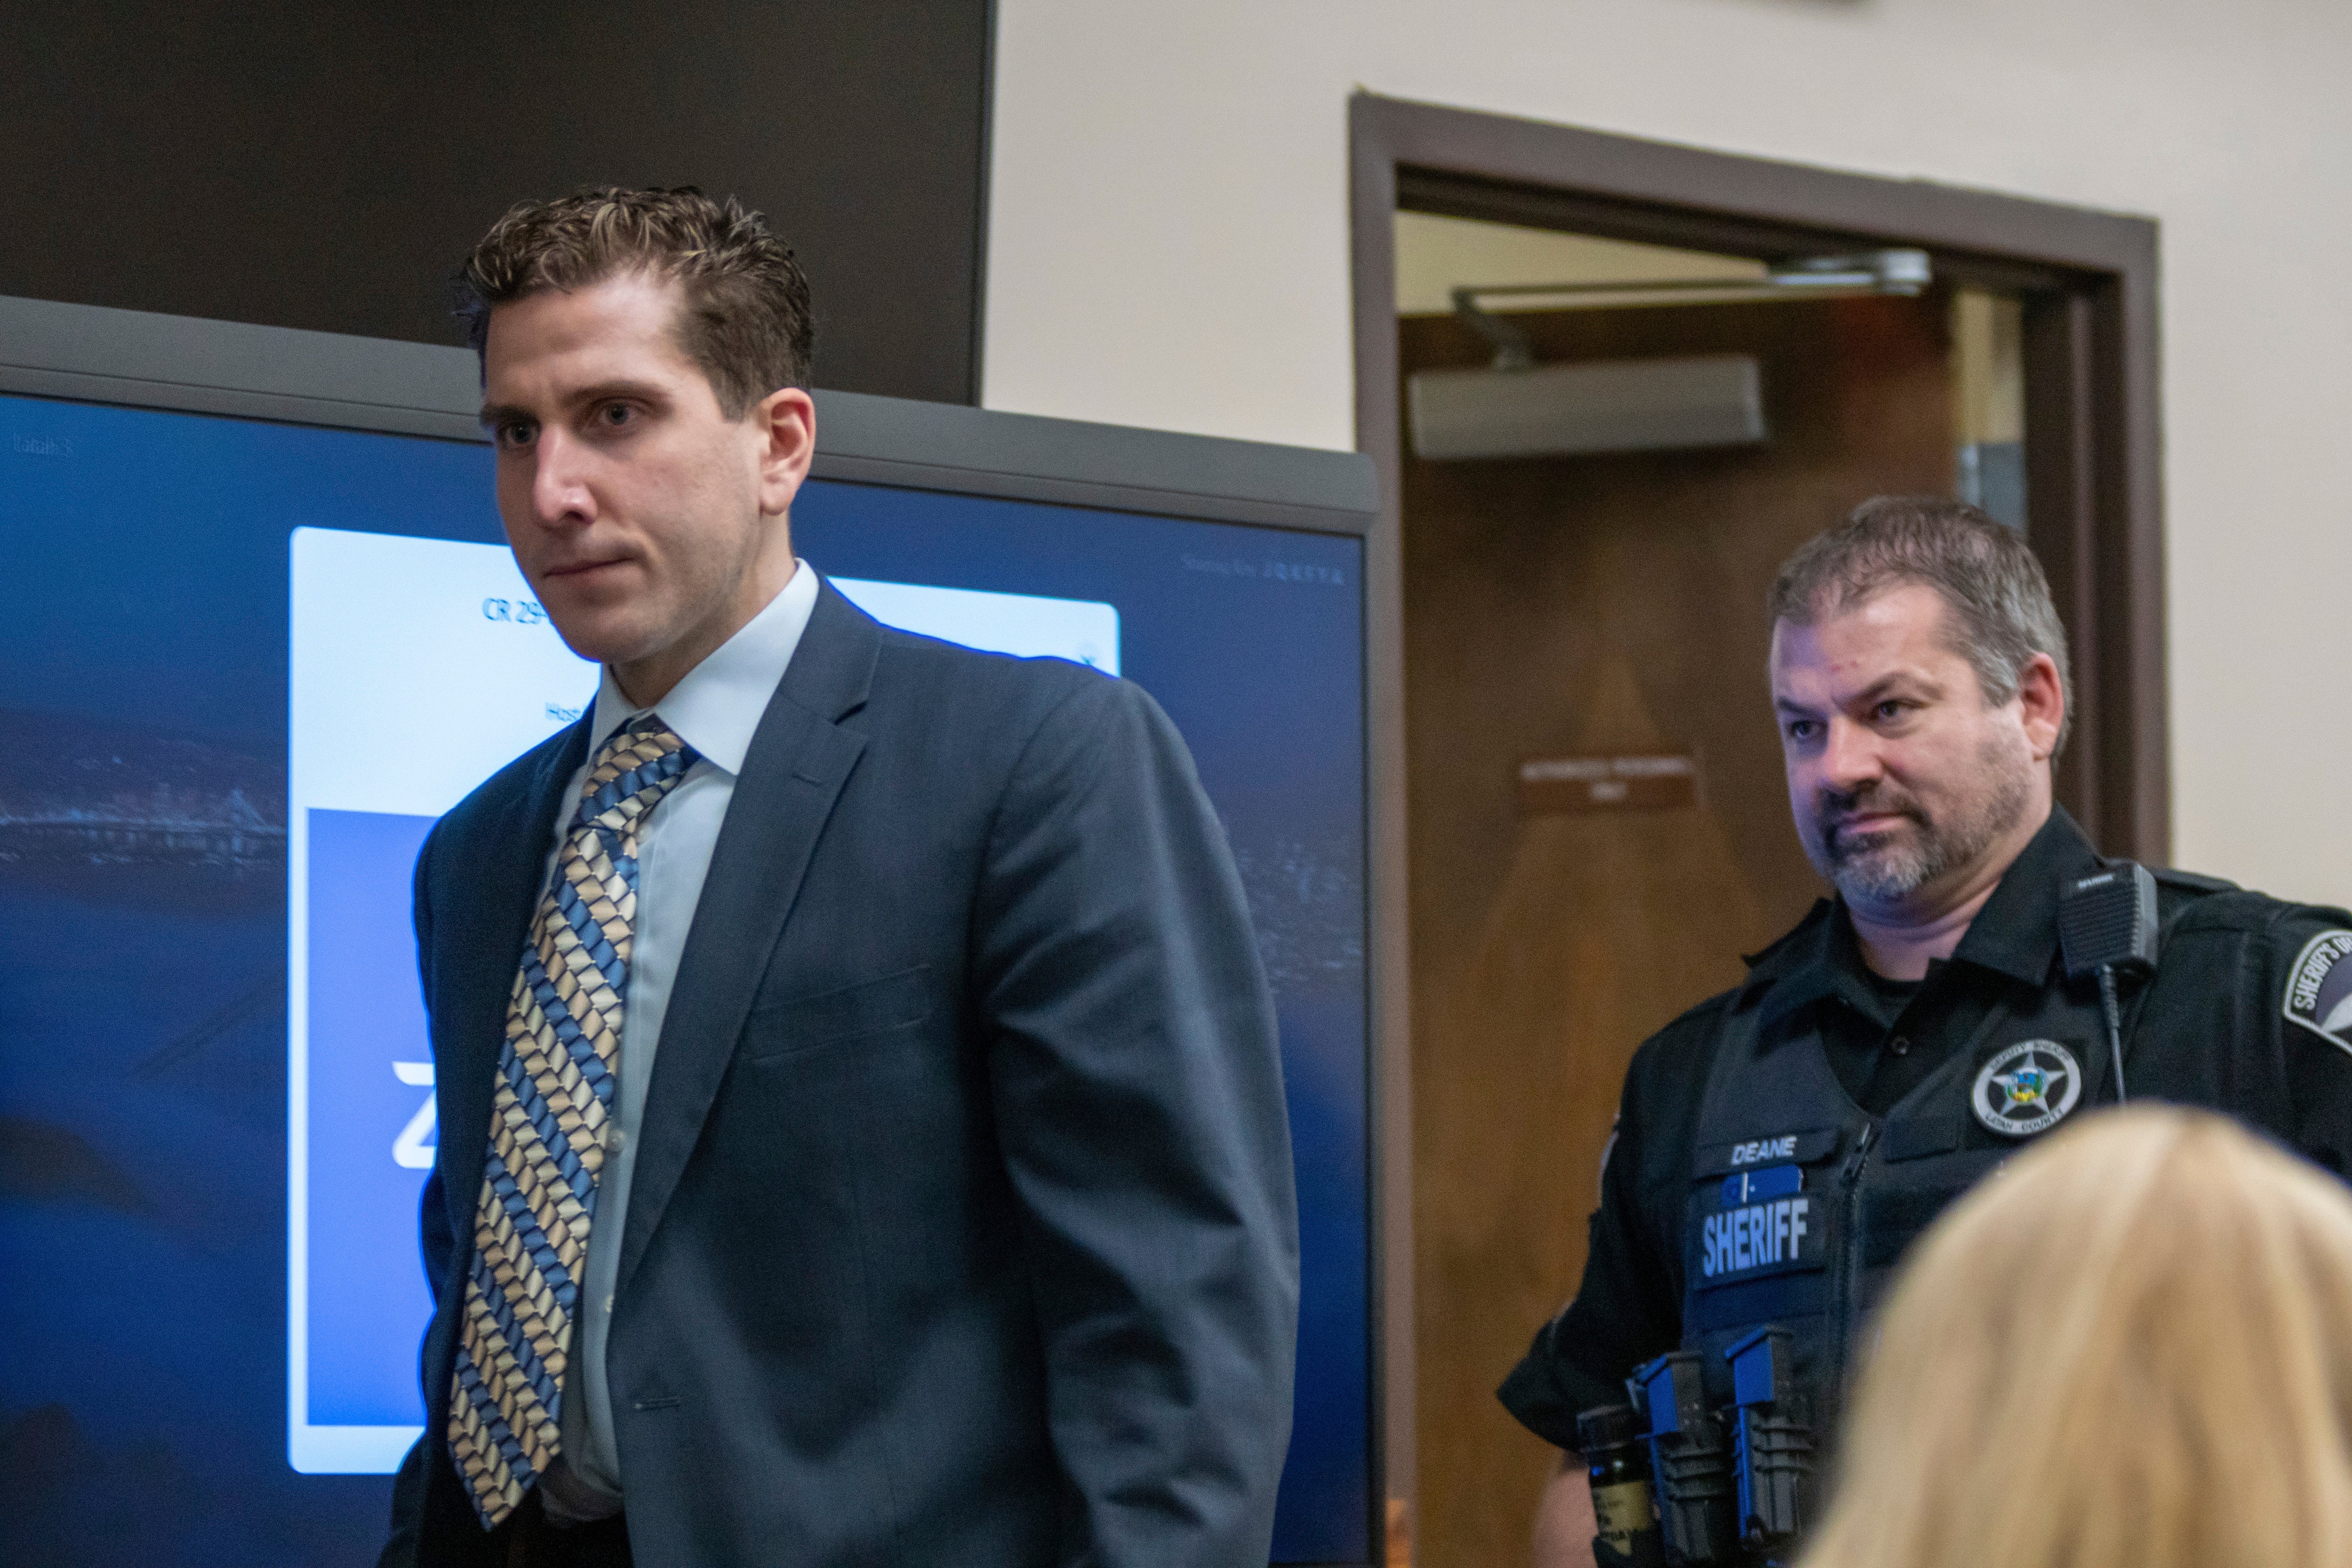 Bryan Kohberger enters a courtroom for a hearing in Moscow, Idaho, on 26 October